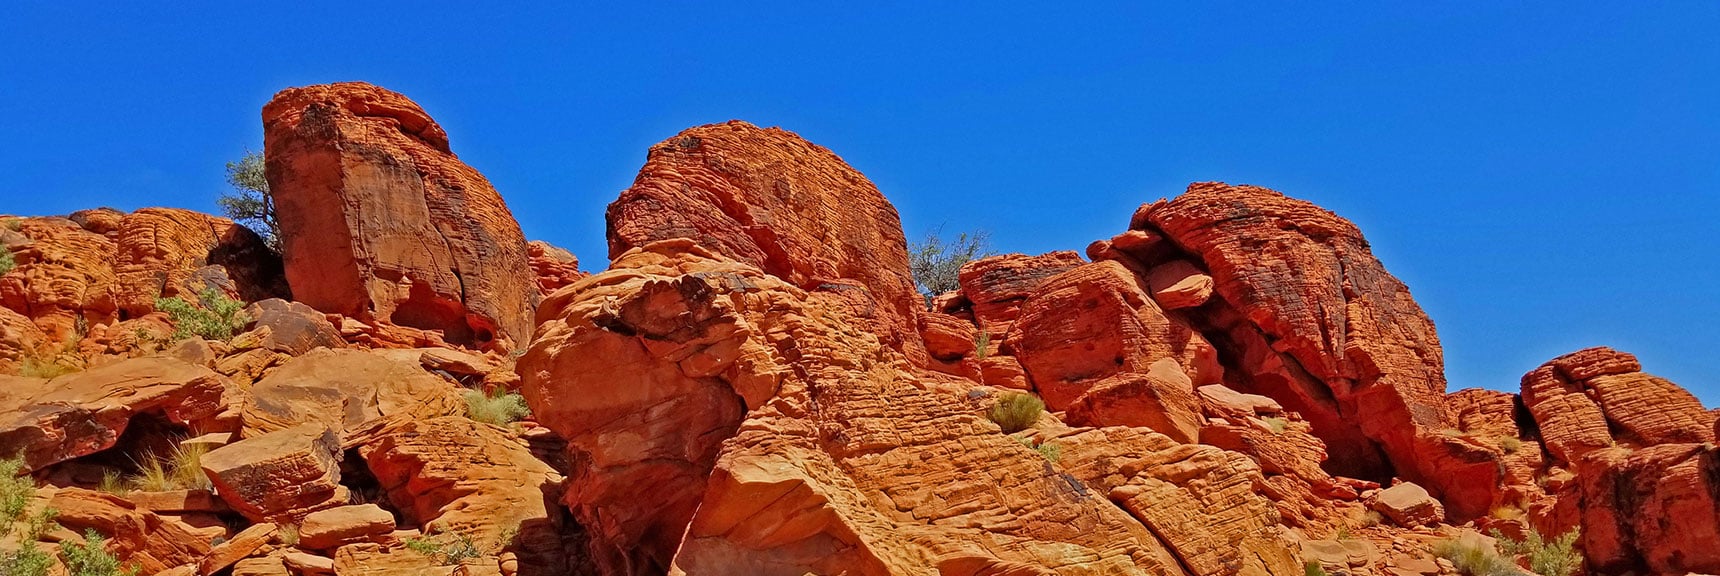 Wandering Amongst Rock Formations in Midst of Largest Section | Little Red Rock Las Vegas, Nevada, Near La Madre Mountains Wilderness